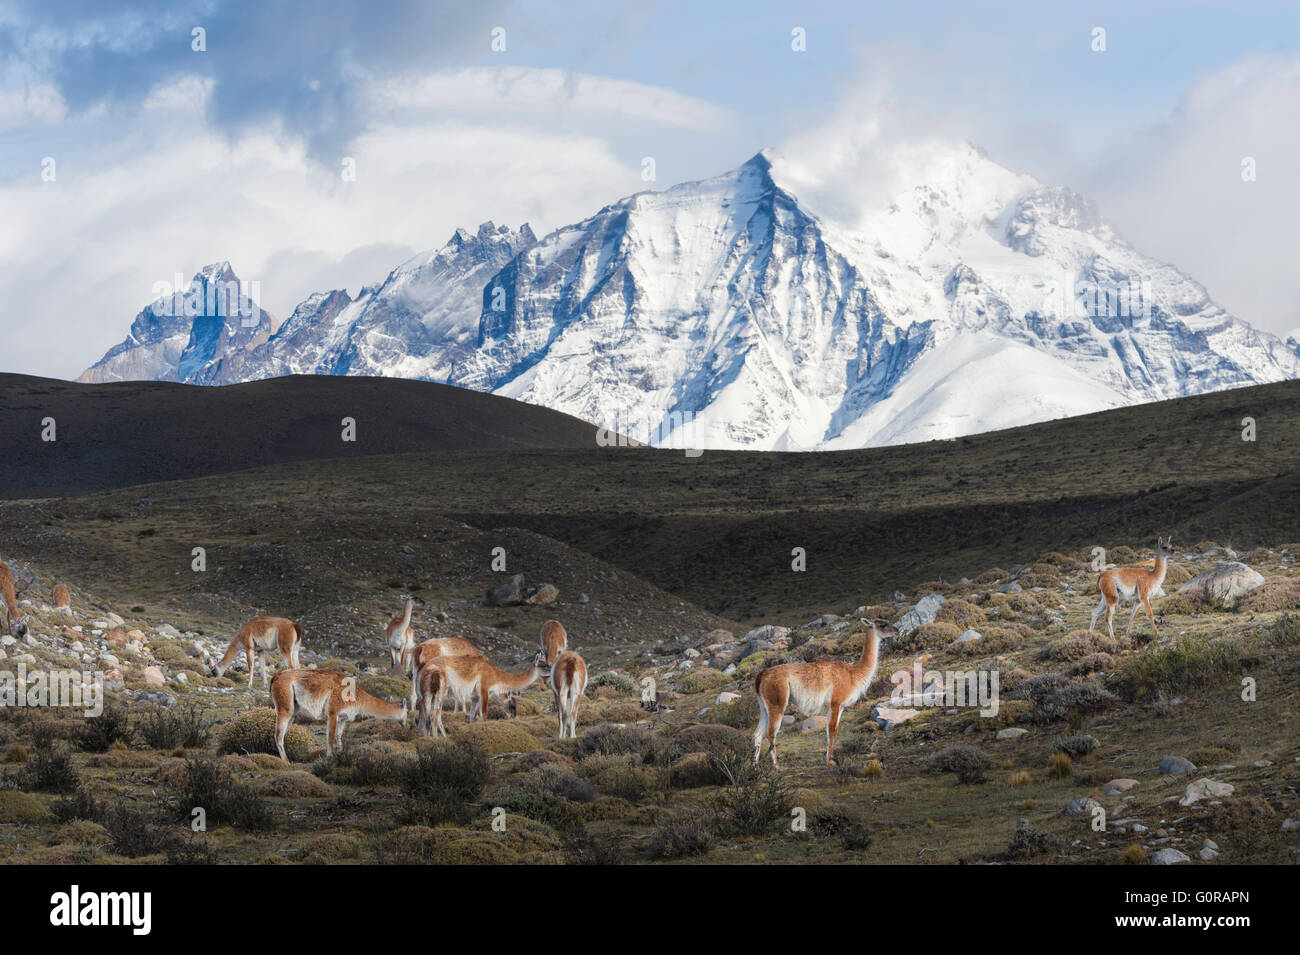 Guanacos (Lama guanicoe) on a ridge in front of snow-capped mountains, Torres del Paine National Park, Chilean Patagonia, Chile Stock Photo